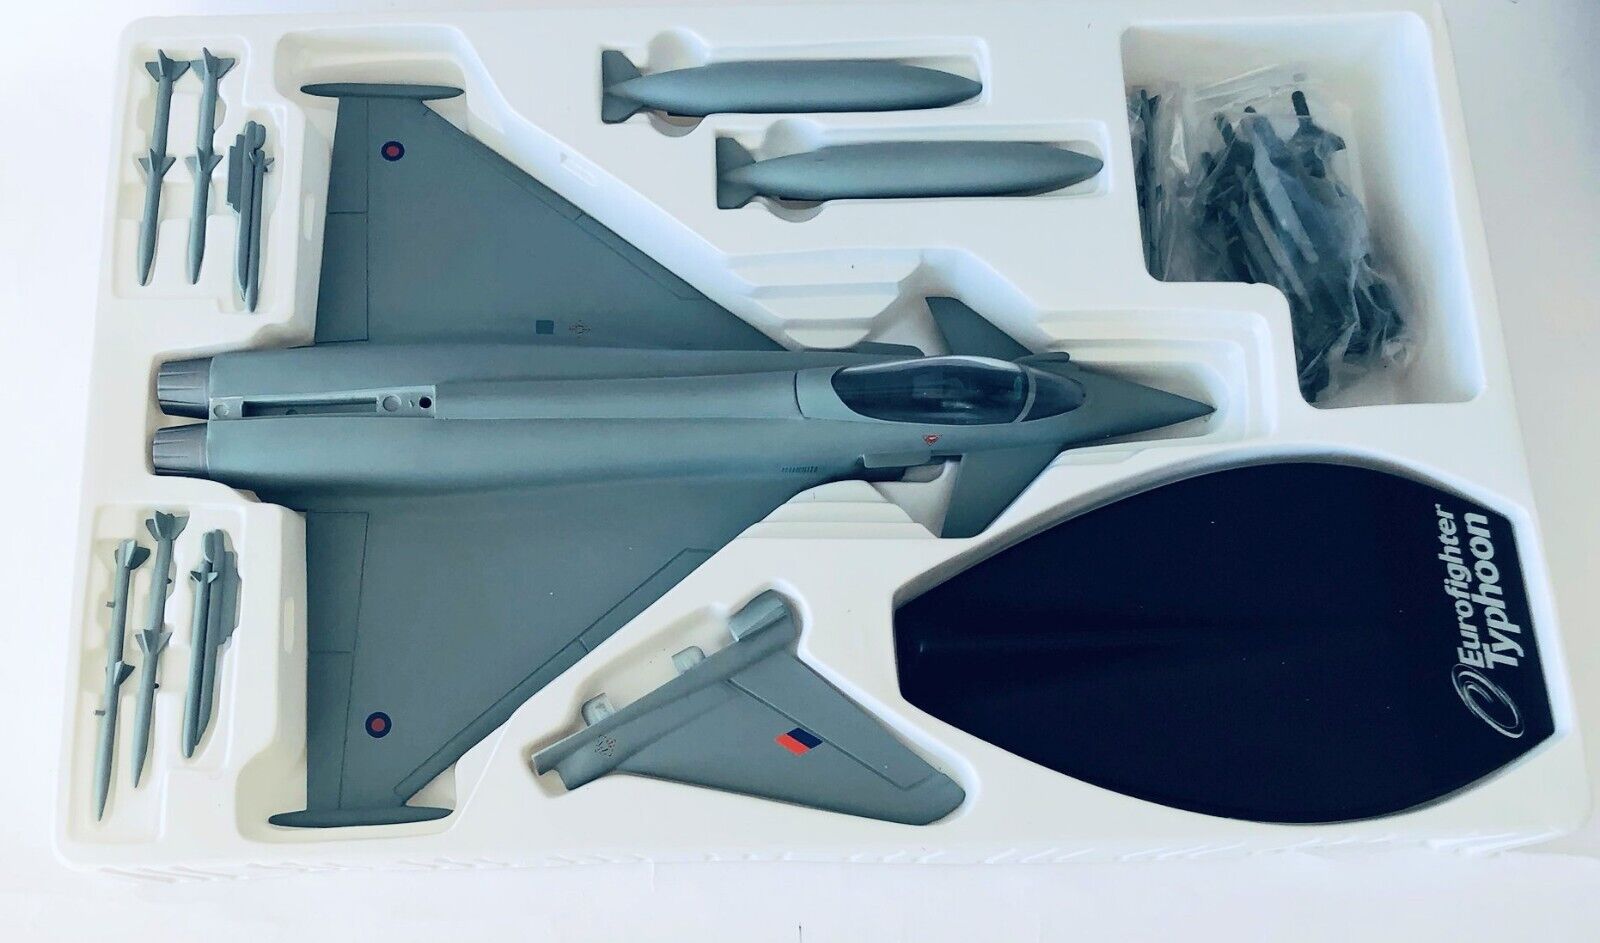 Eurofigther RAF Royal Air Force Lupa Collectors Model Scale 1:48 J